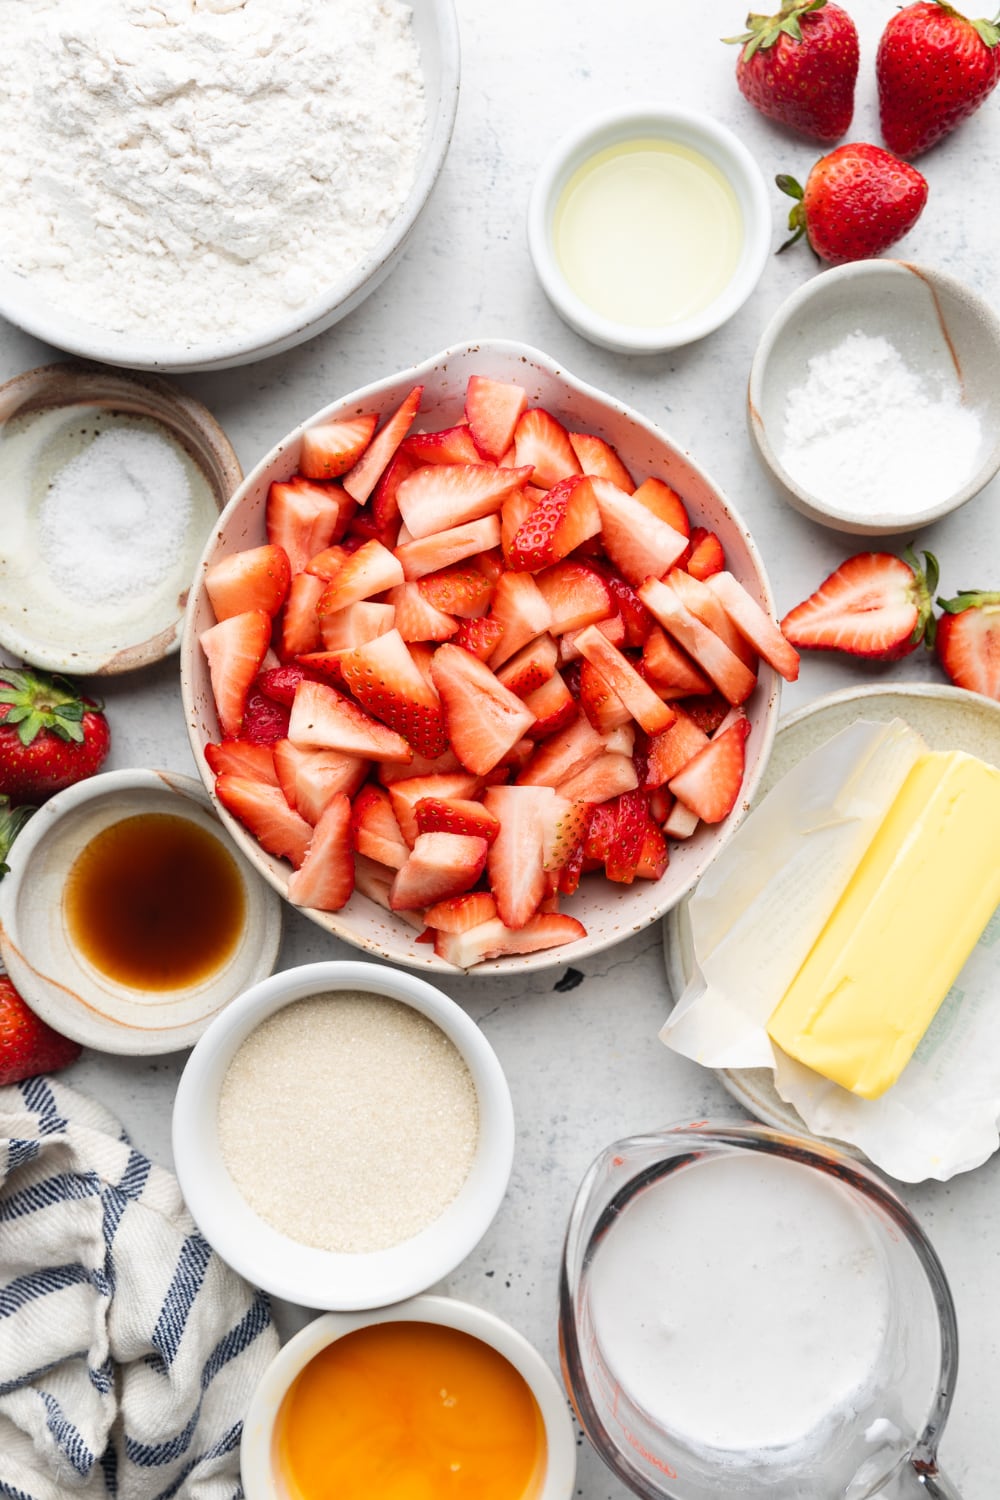 Bowl of ingredients including strawberries, butter, sugar, and milk.